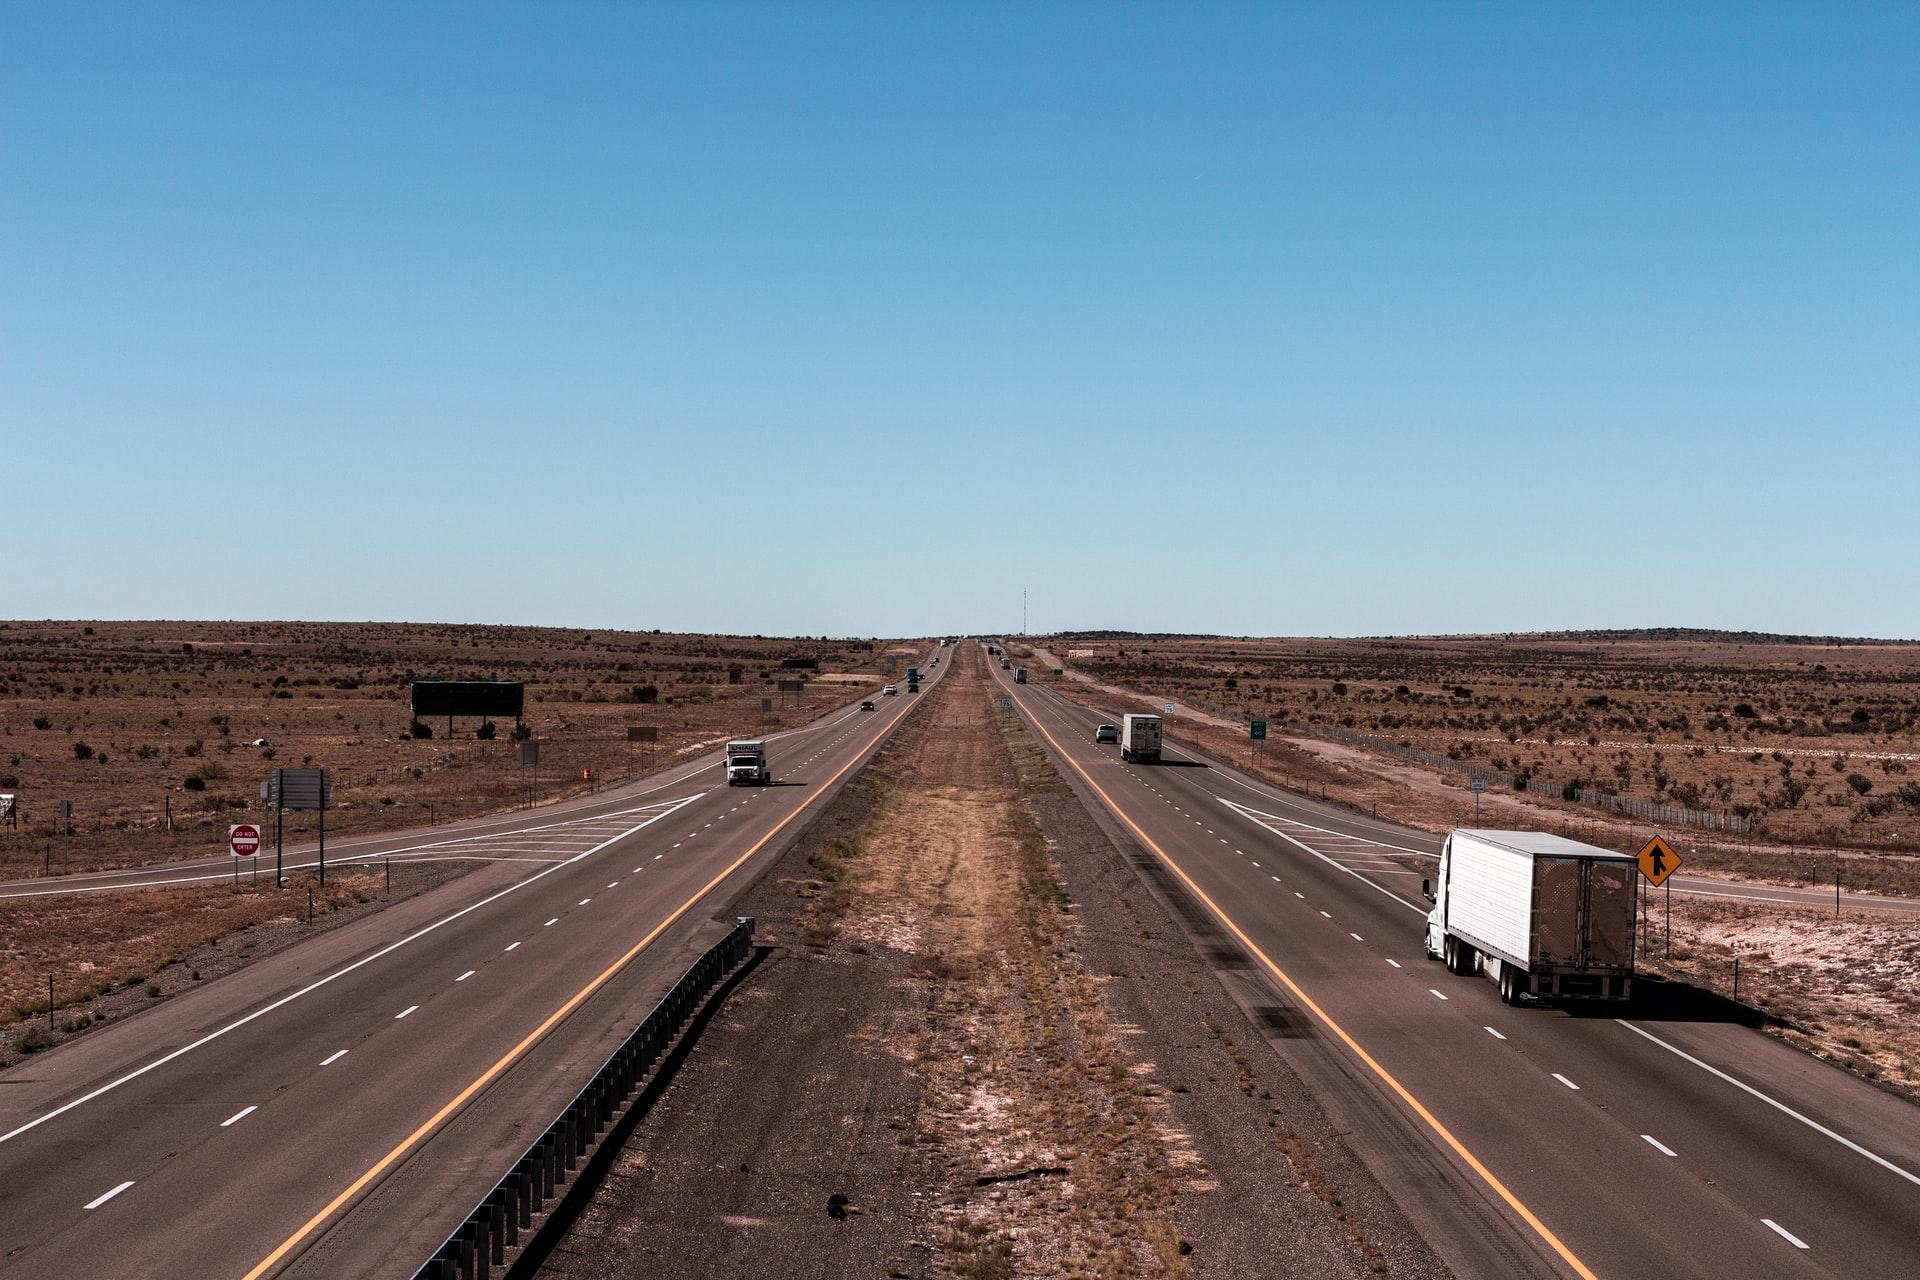 Highways are a key part of discussions about improving transportation